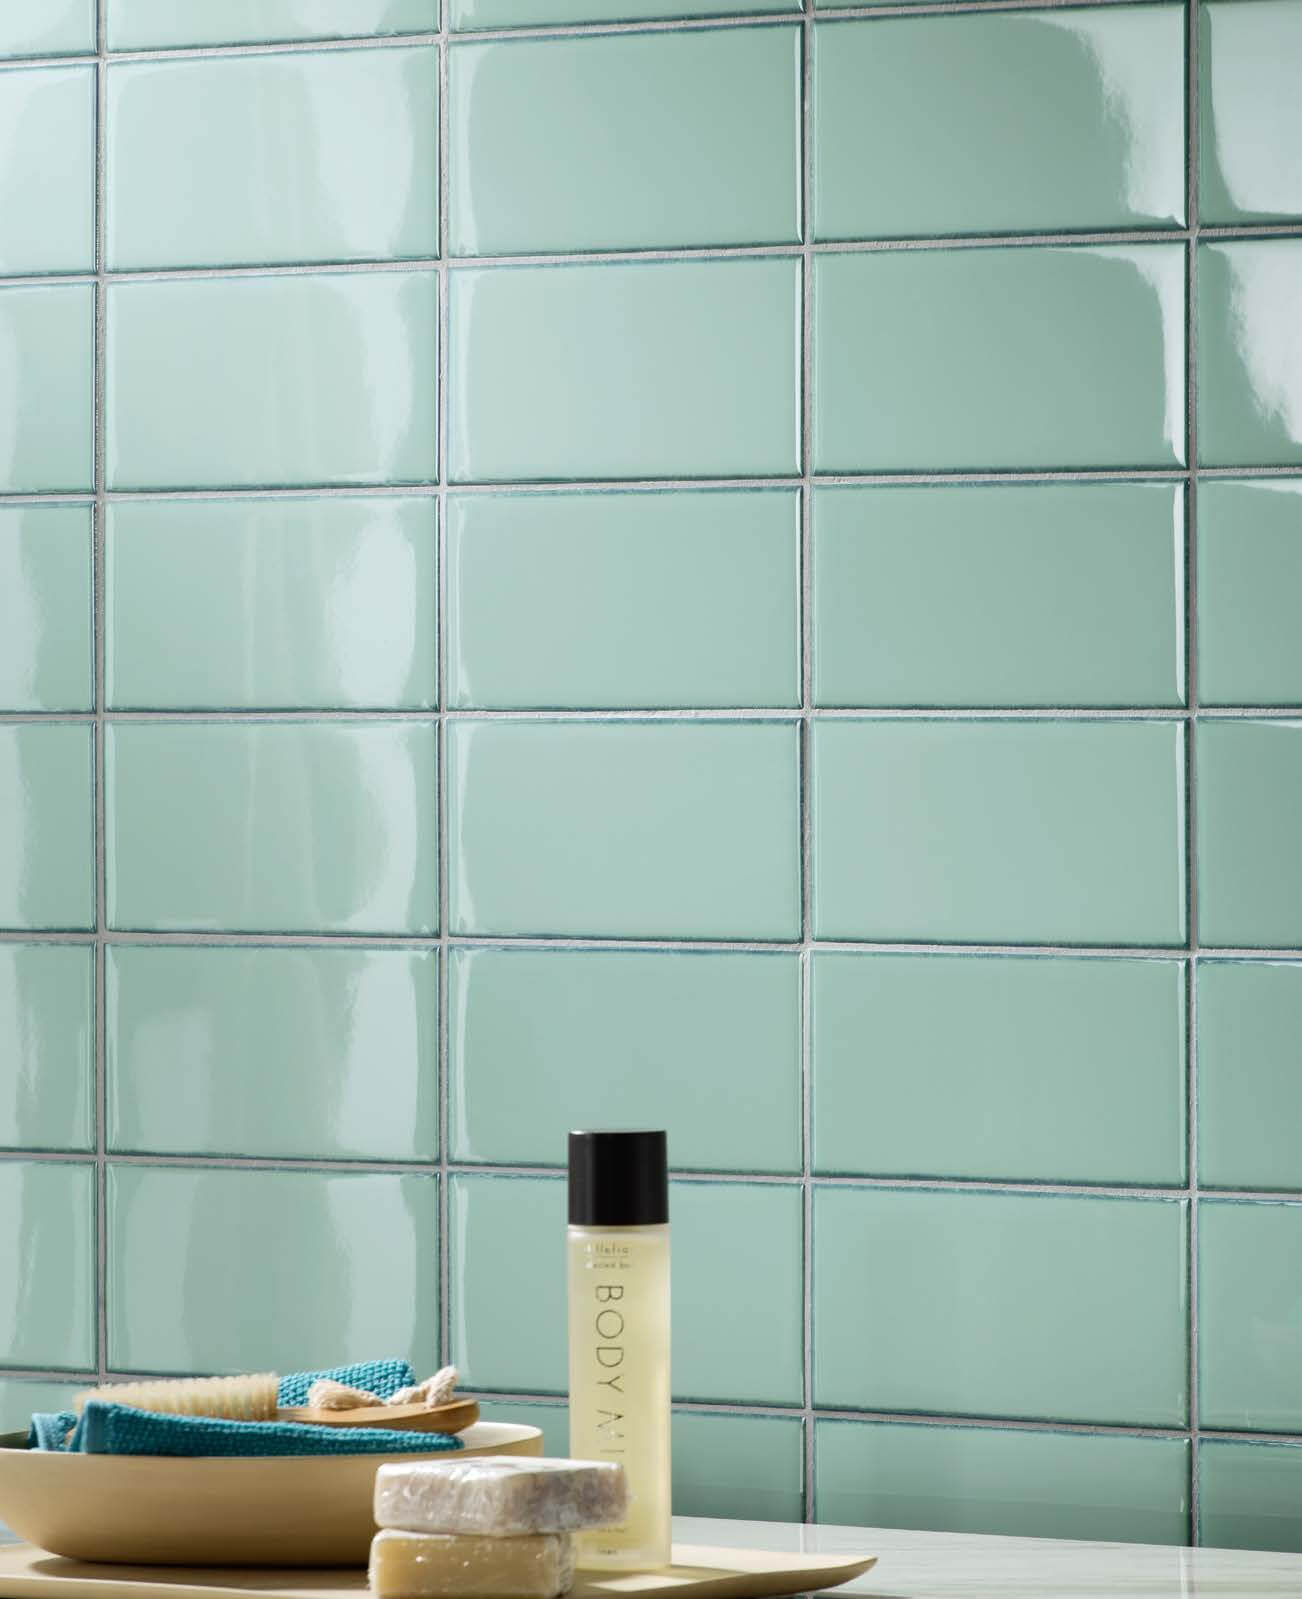 Personal hygiene items in front of Blue-green tile in a horizontal grid
